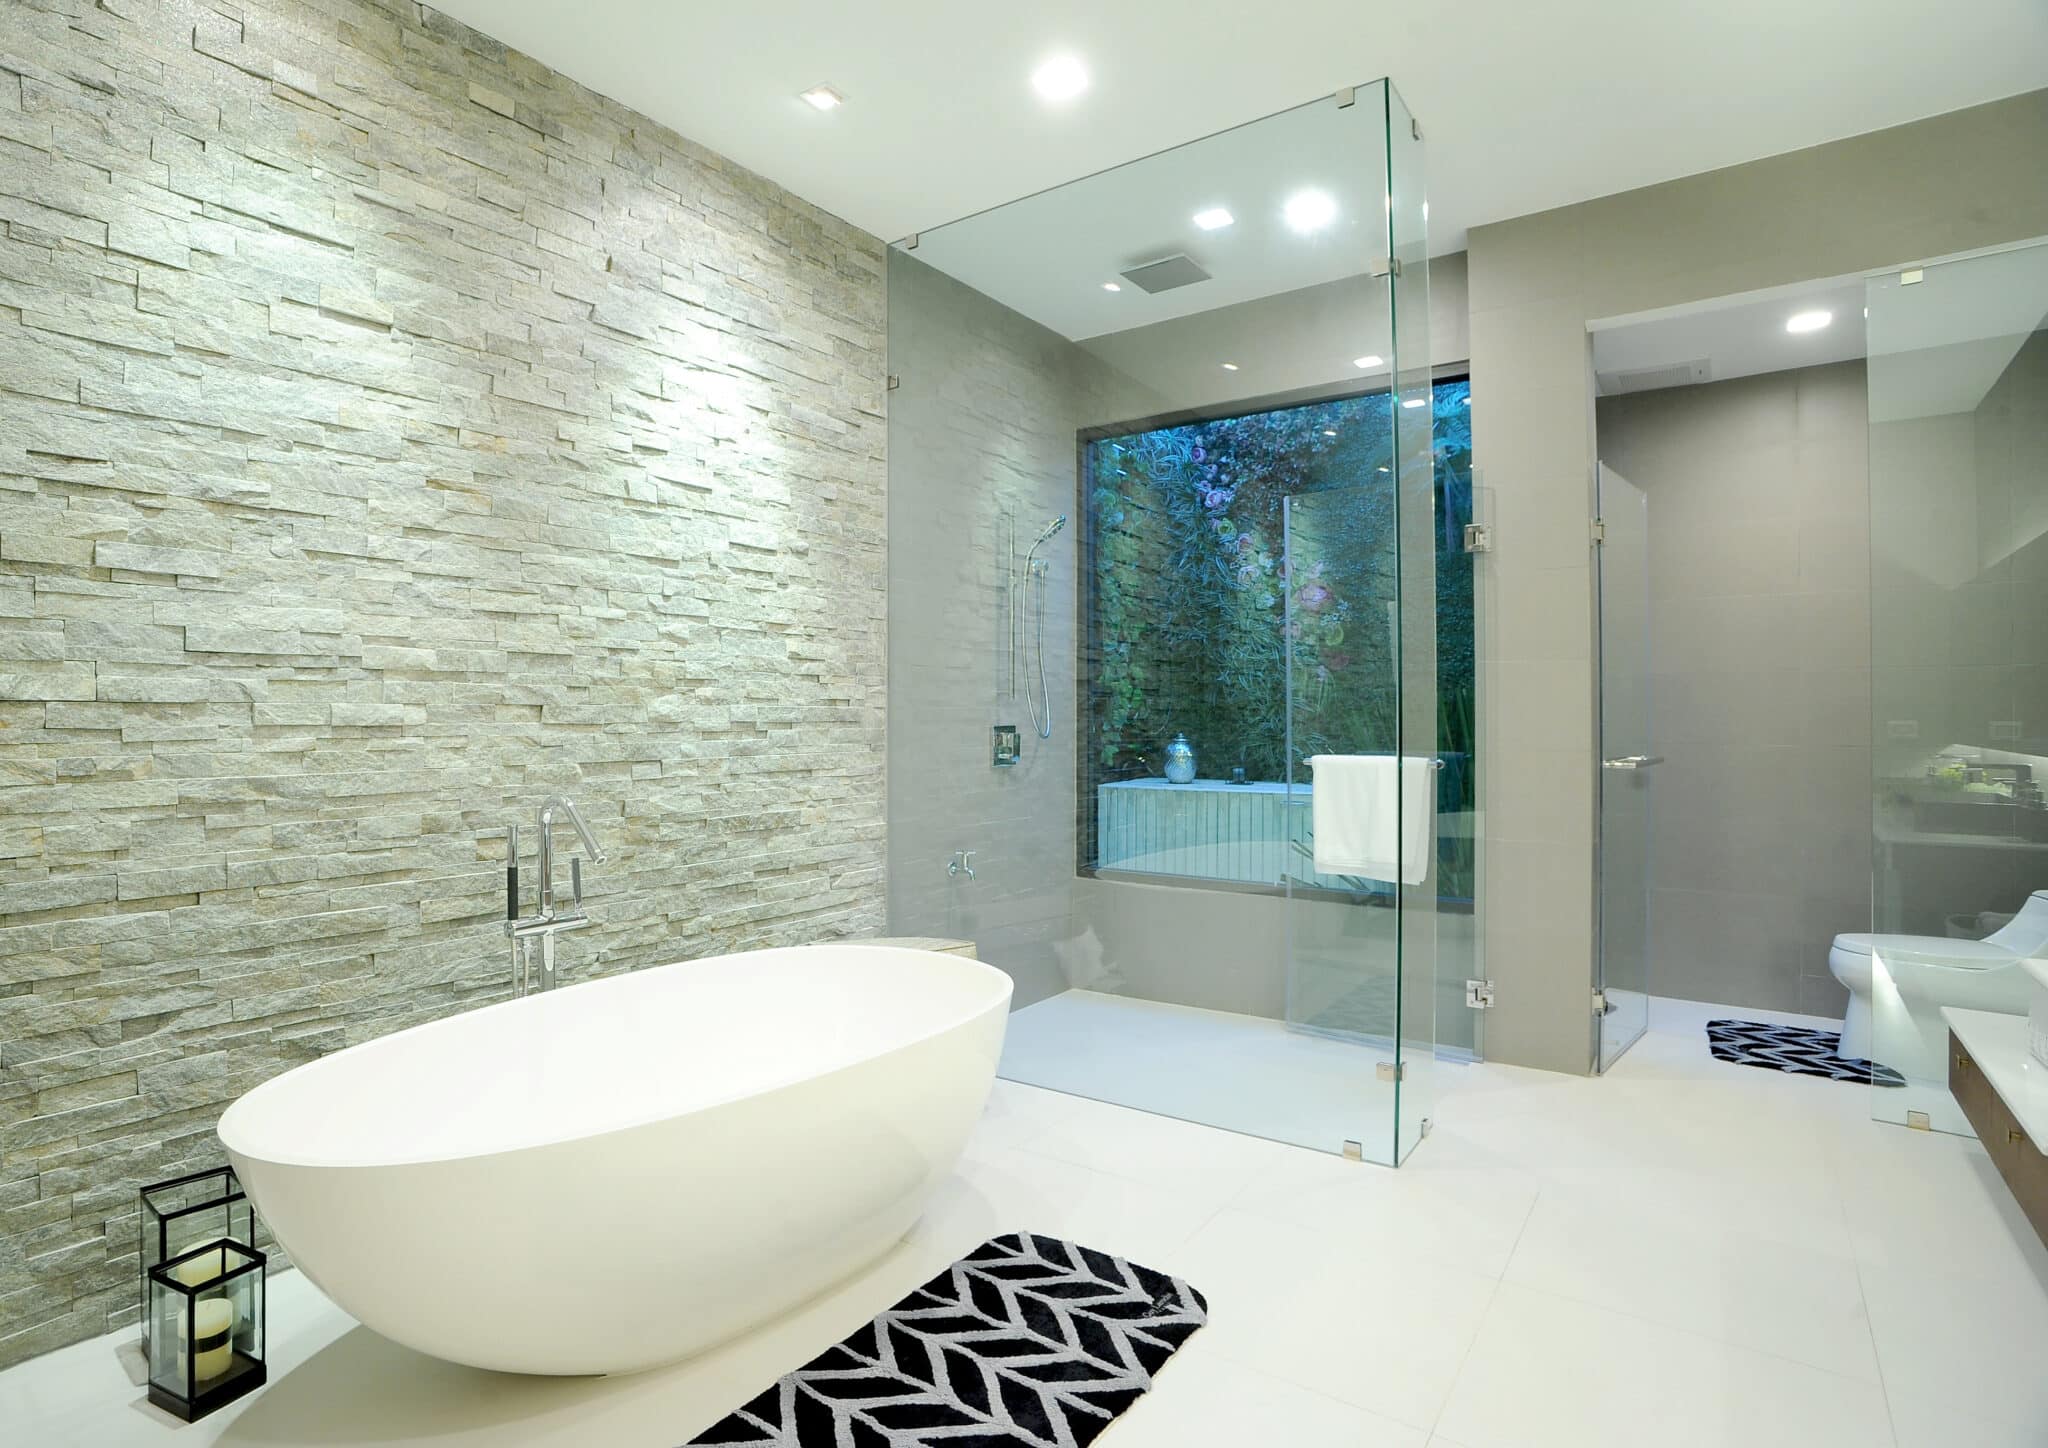 Luxury bathroom style with glass enclosed shower, a bath tub, and toilet